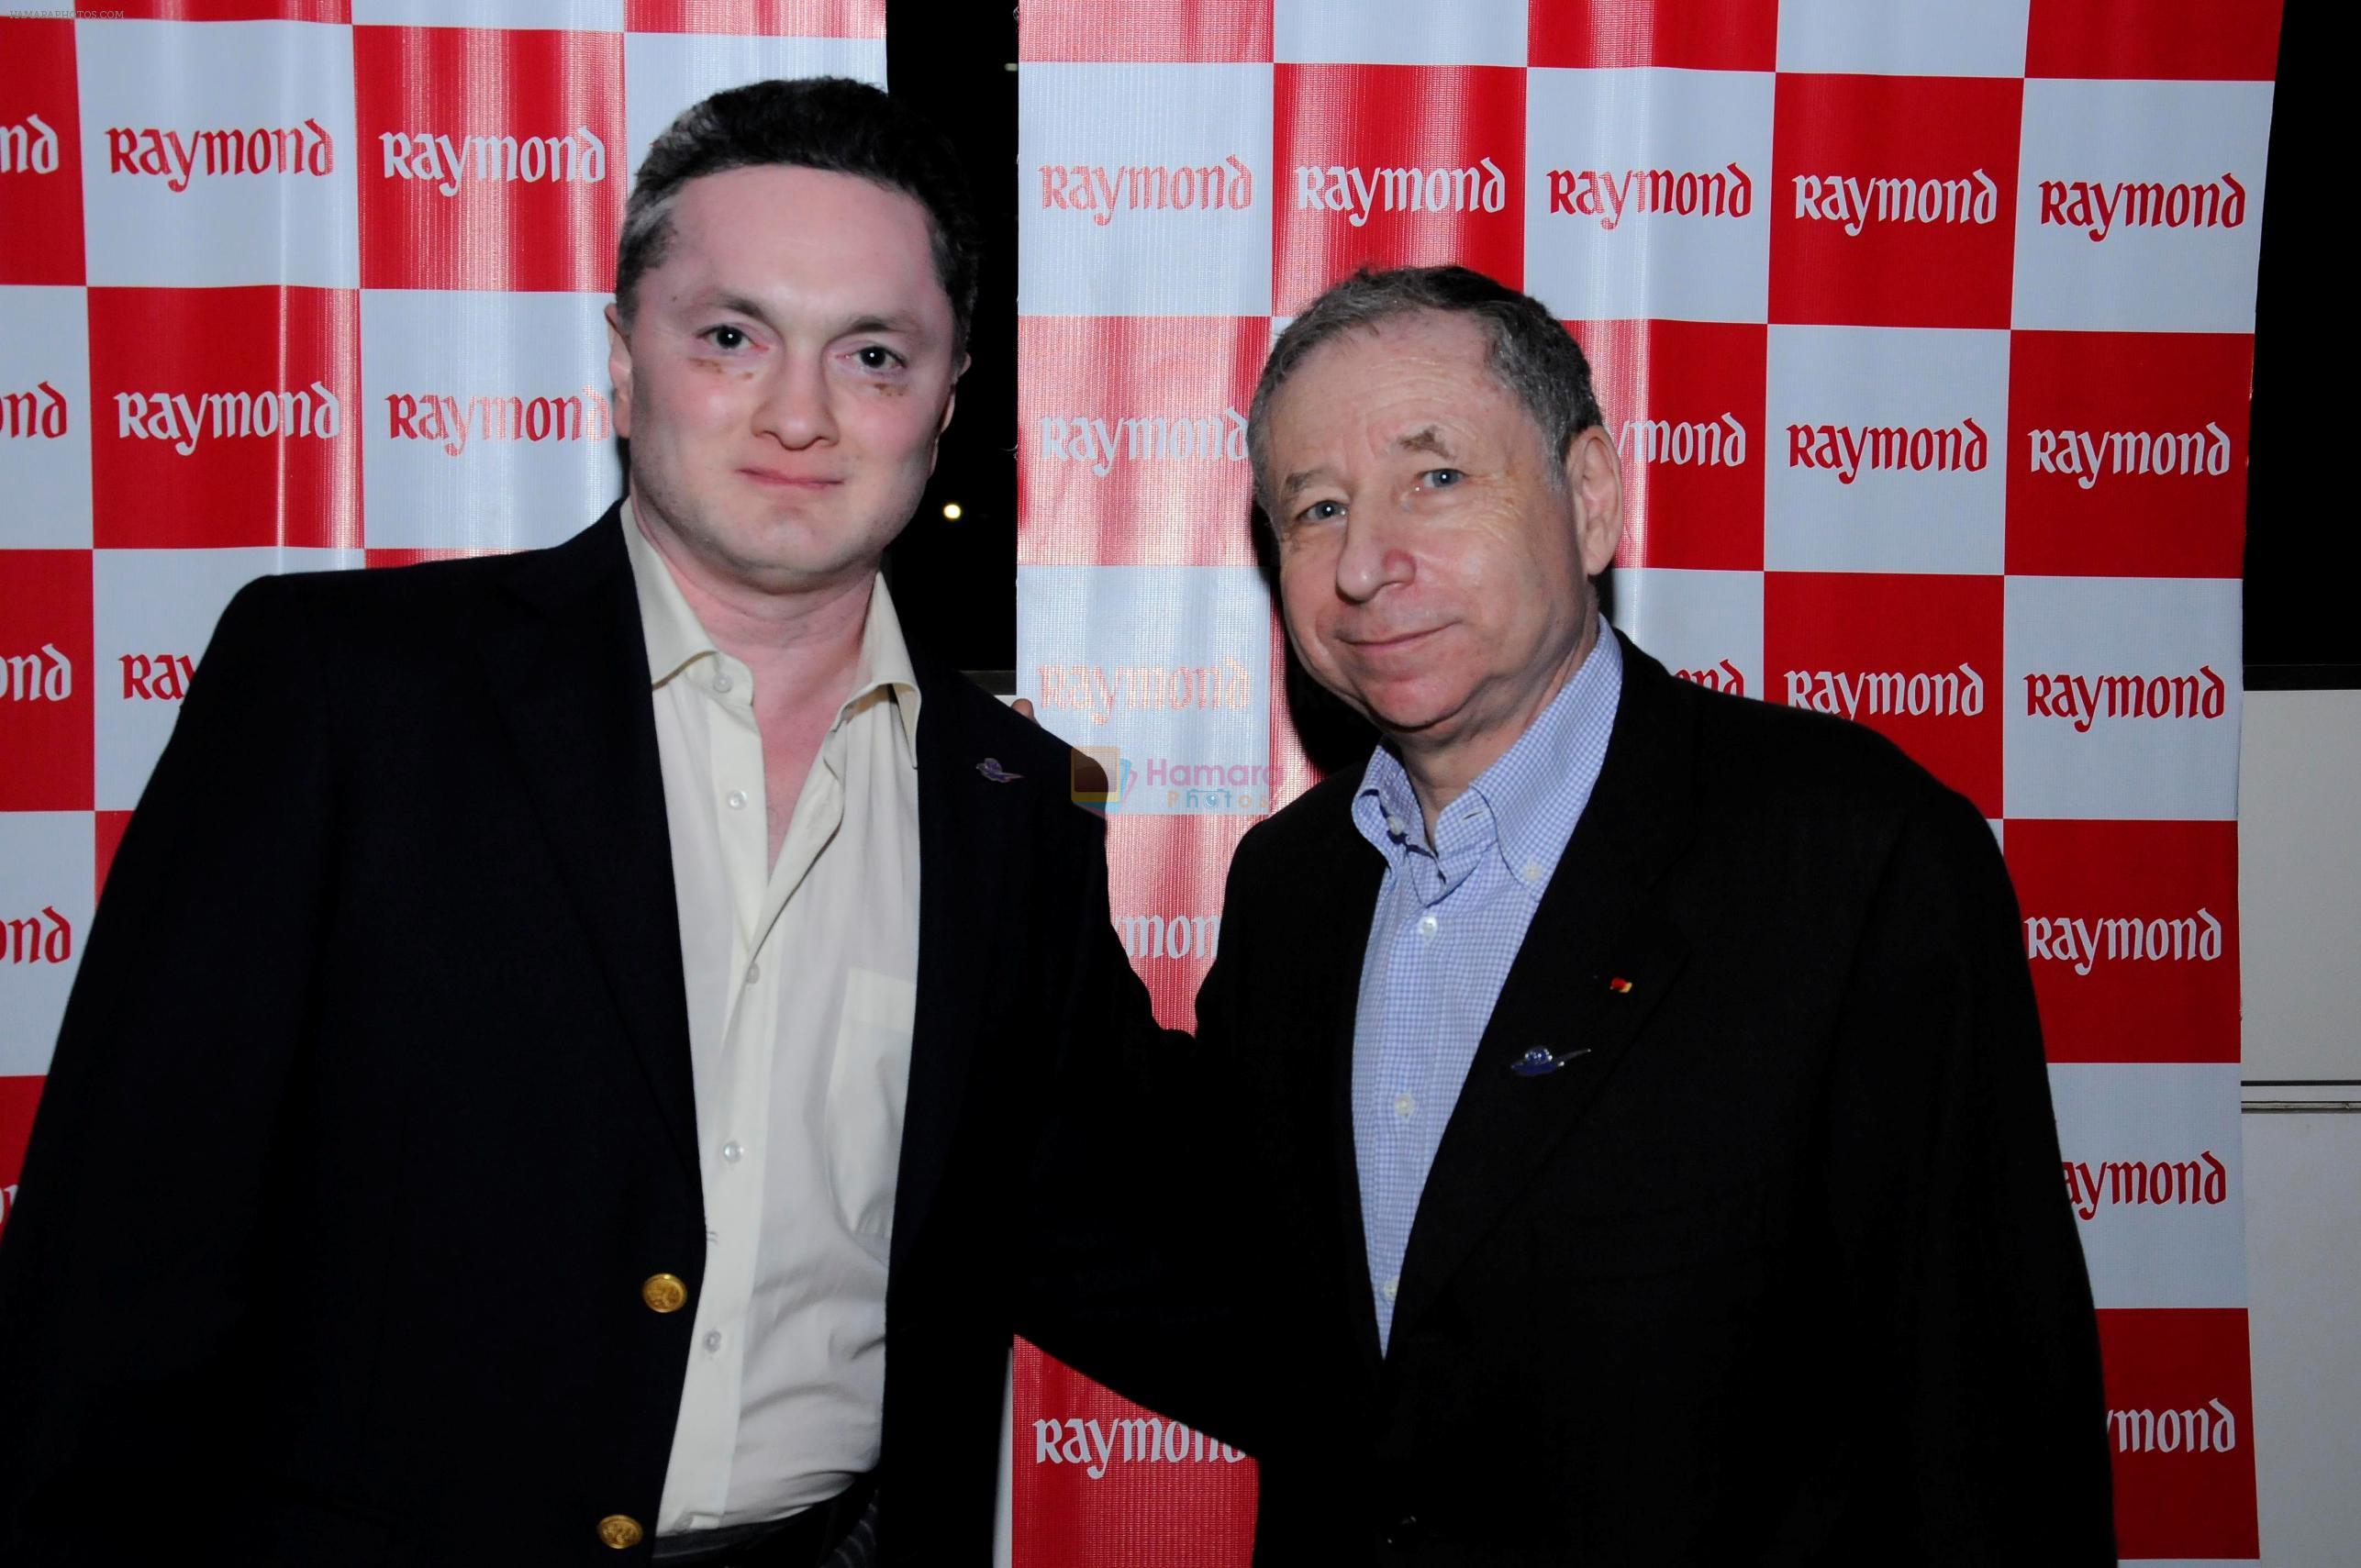 Mr Singhania and Mr Todt at The Raymond Shop2